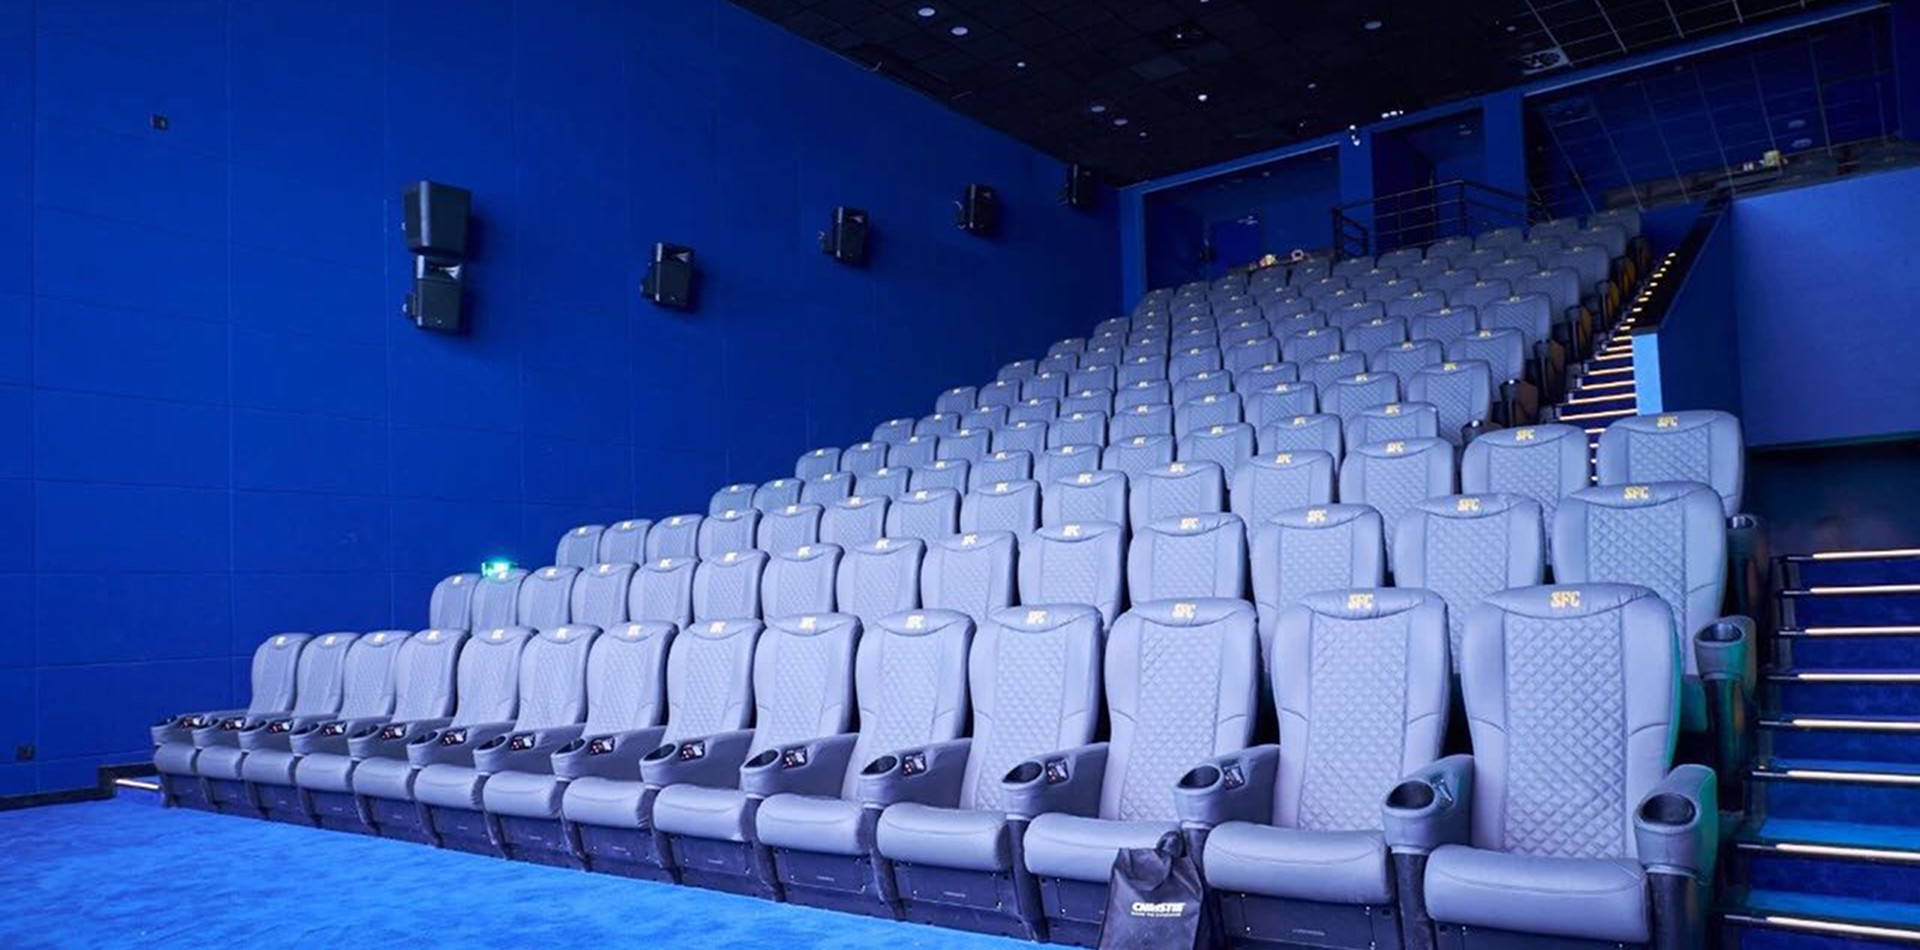 Samsung and HARMAN Professional Solutions Bring Immersive Onyx Visuals and Sound to SFC Yonghua Cinema City